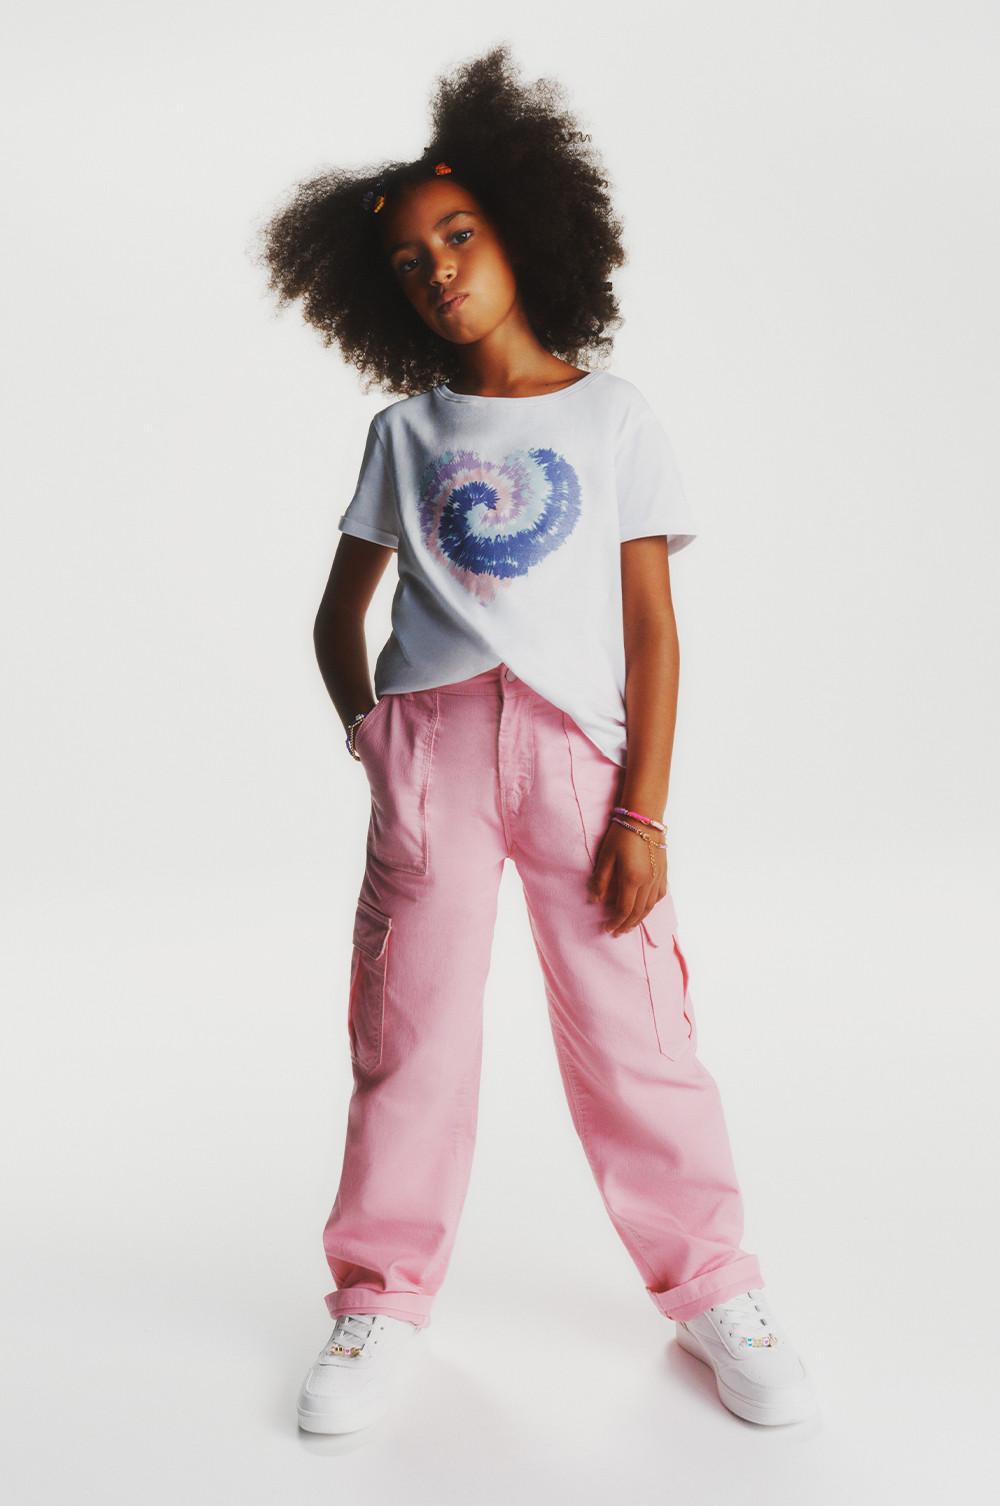 Child in pink cargo pants